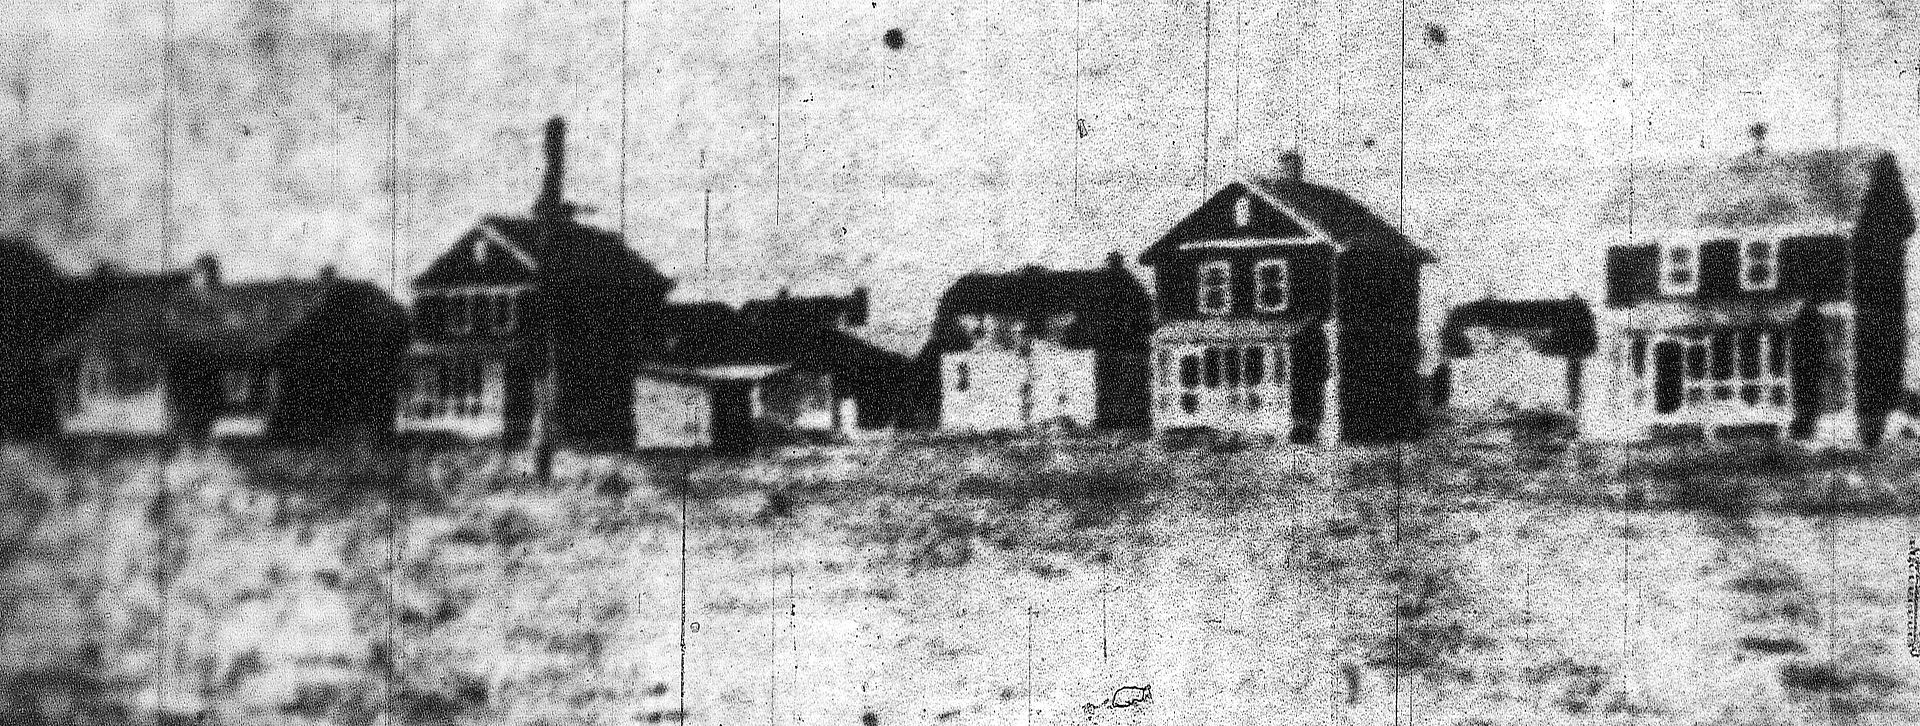 The pictures shown in the 1938 Richmond News Leader article came from Drewery Jones. I have 200+ pictures of Penniman (thanks to Hagley Museum and Library), but I dont have anything from this angle, showing all the pretty little houses.